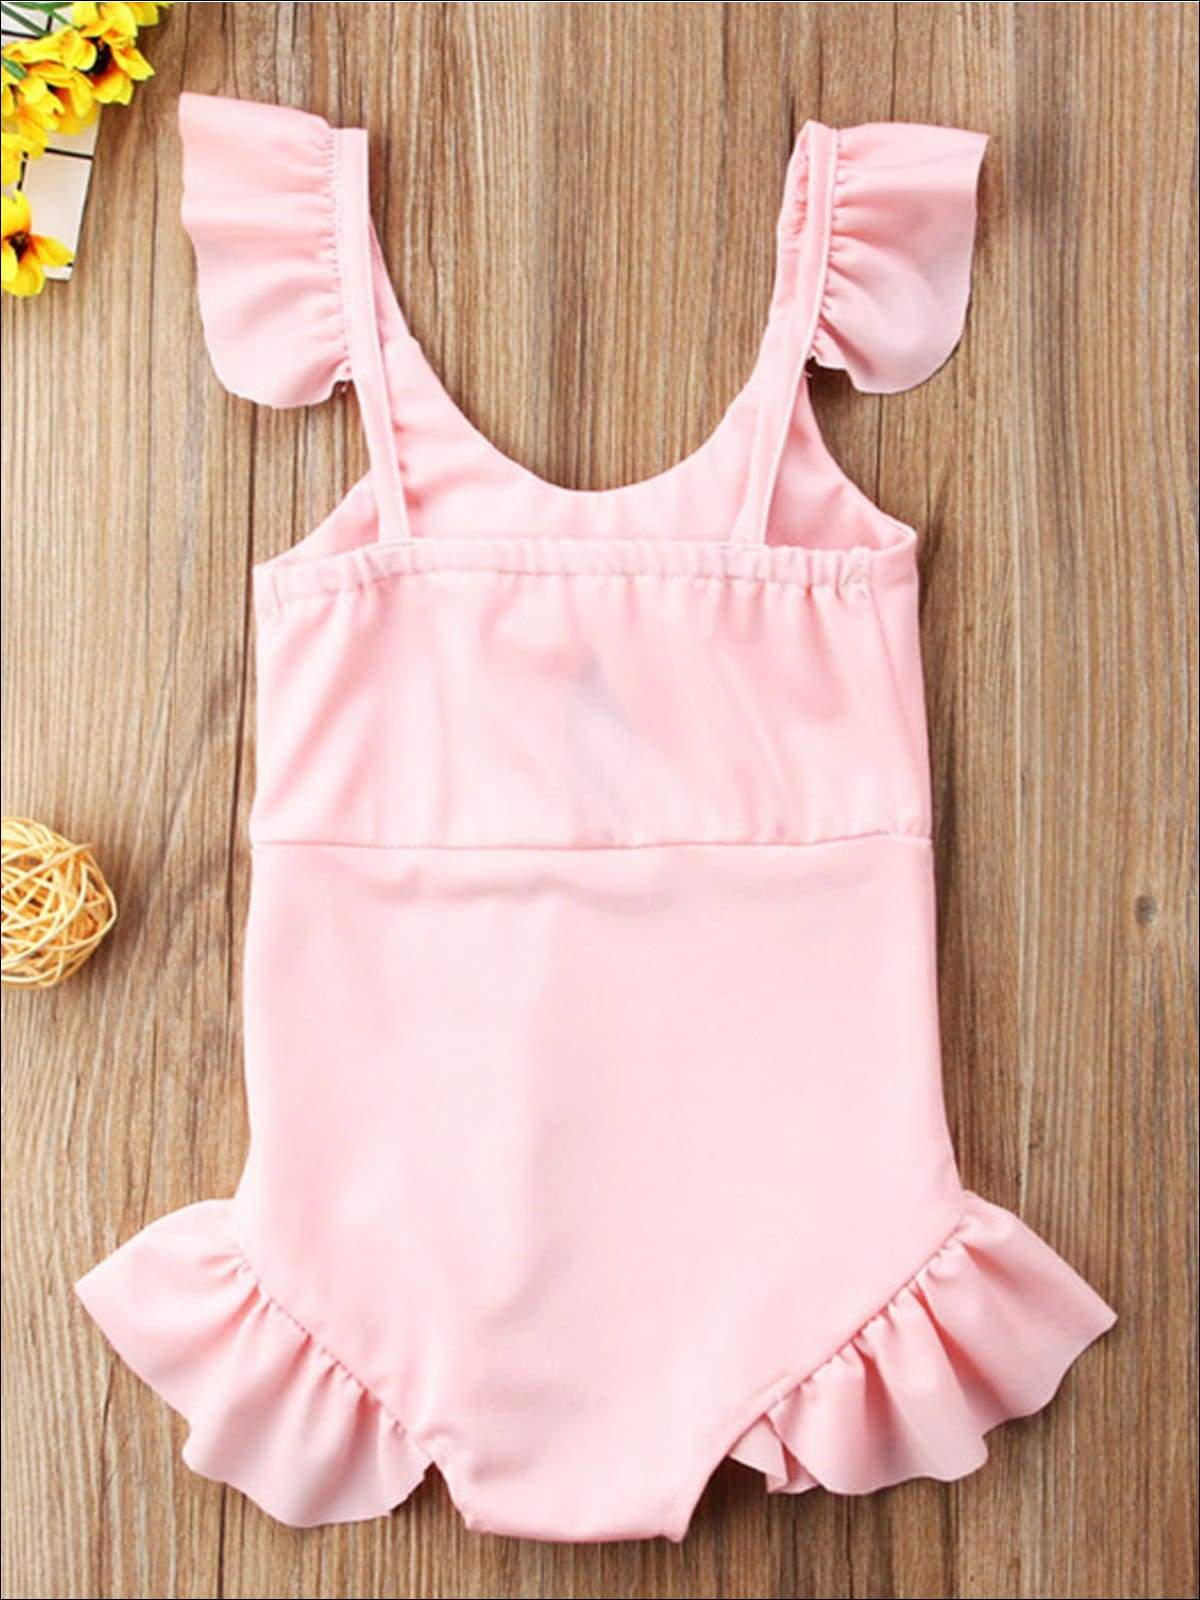 Girls Flutter Sleeve Bowknot One Piece Swimsuit With Cutout Detail - Girls Swimsuit